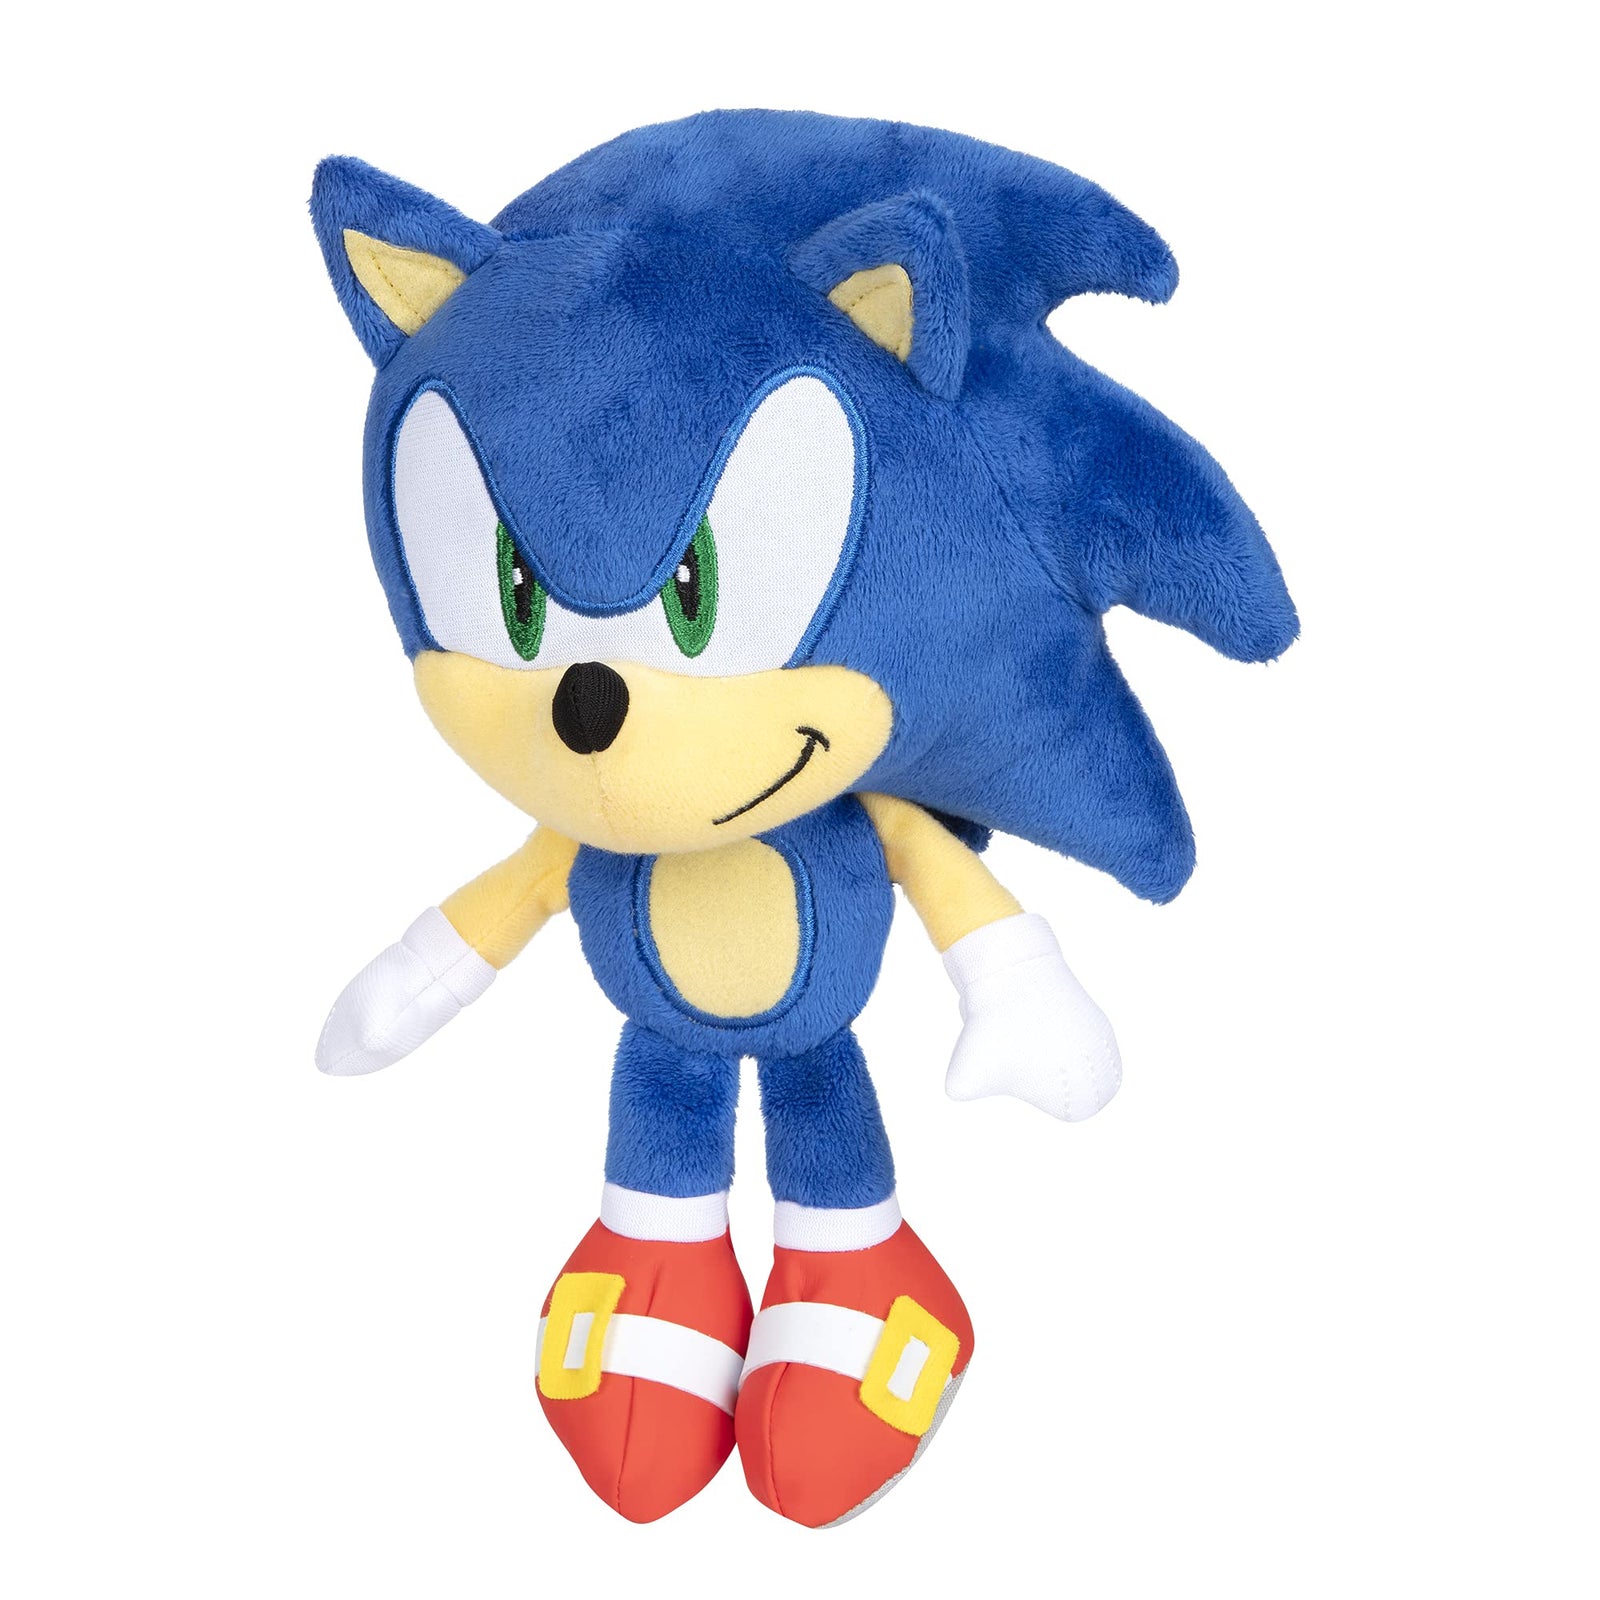 Sonic The Hedgehog Plush 9-Inch Modern Sonic Collectible Toy